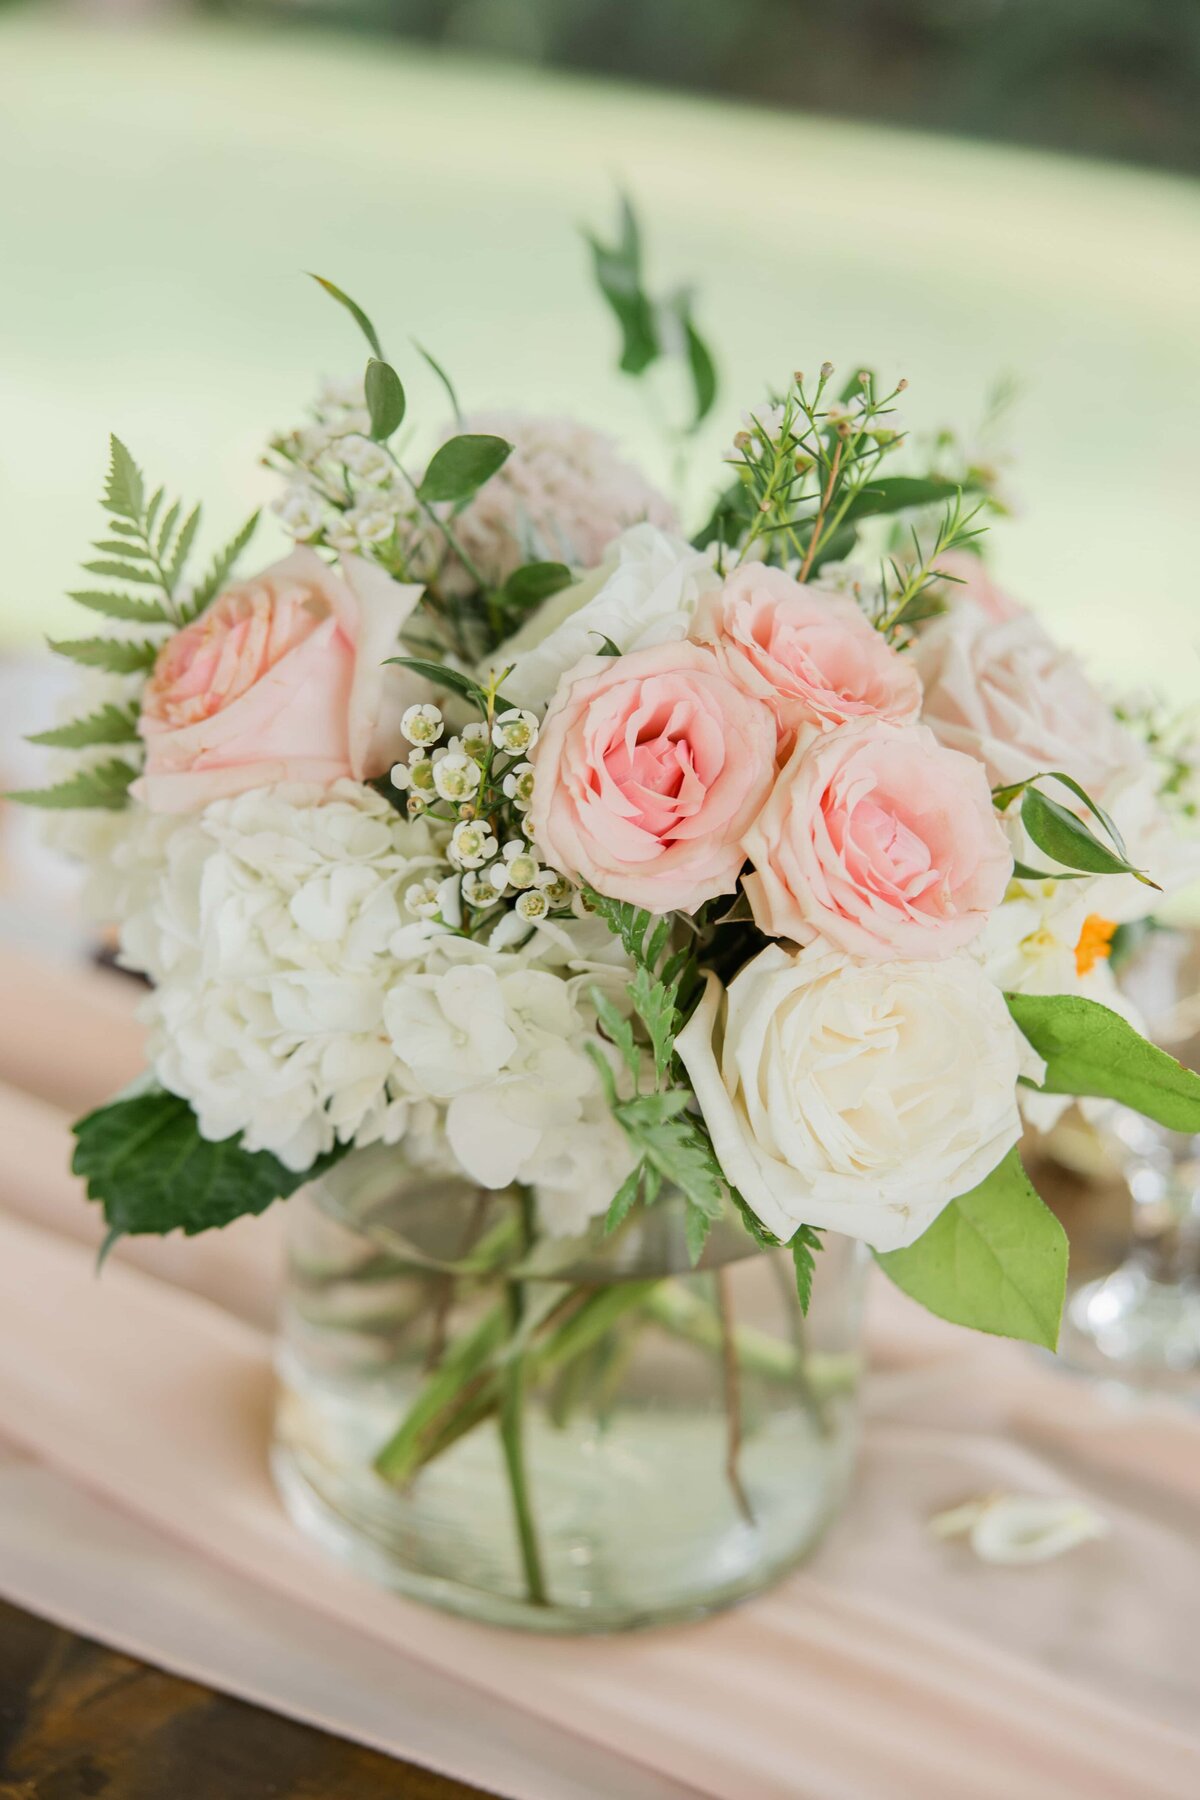 A floral arrangement in a glass vase featuring pink roses, white hydrangeas, and green foliage on a table with a pink runner, perfect for park farm winery weddings.